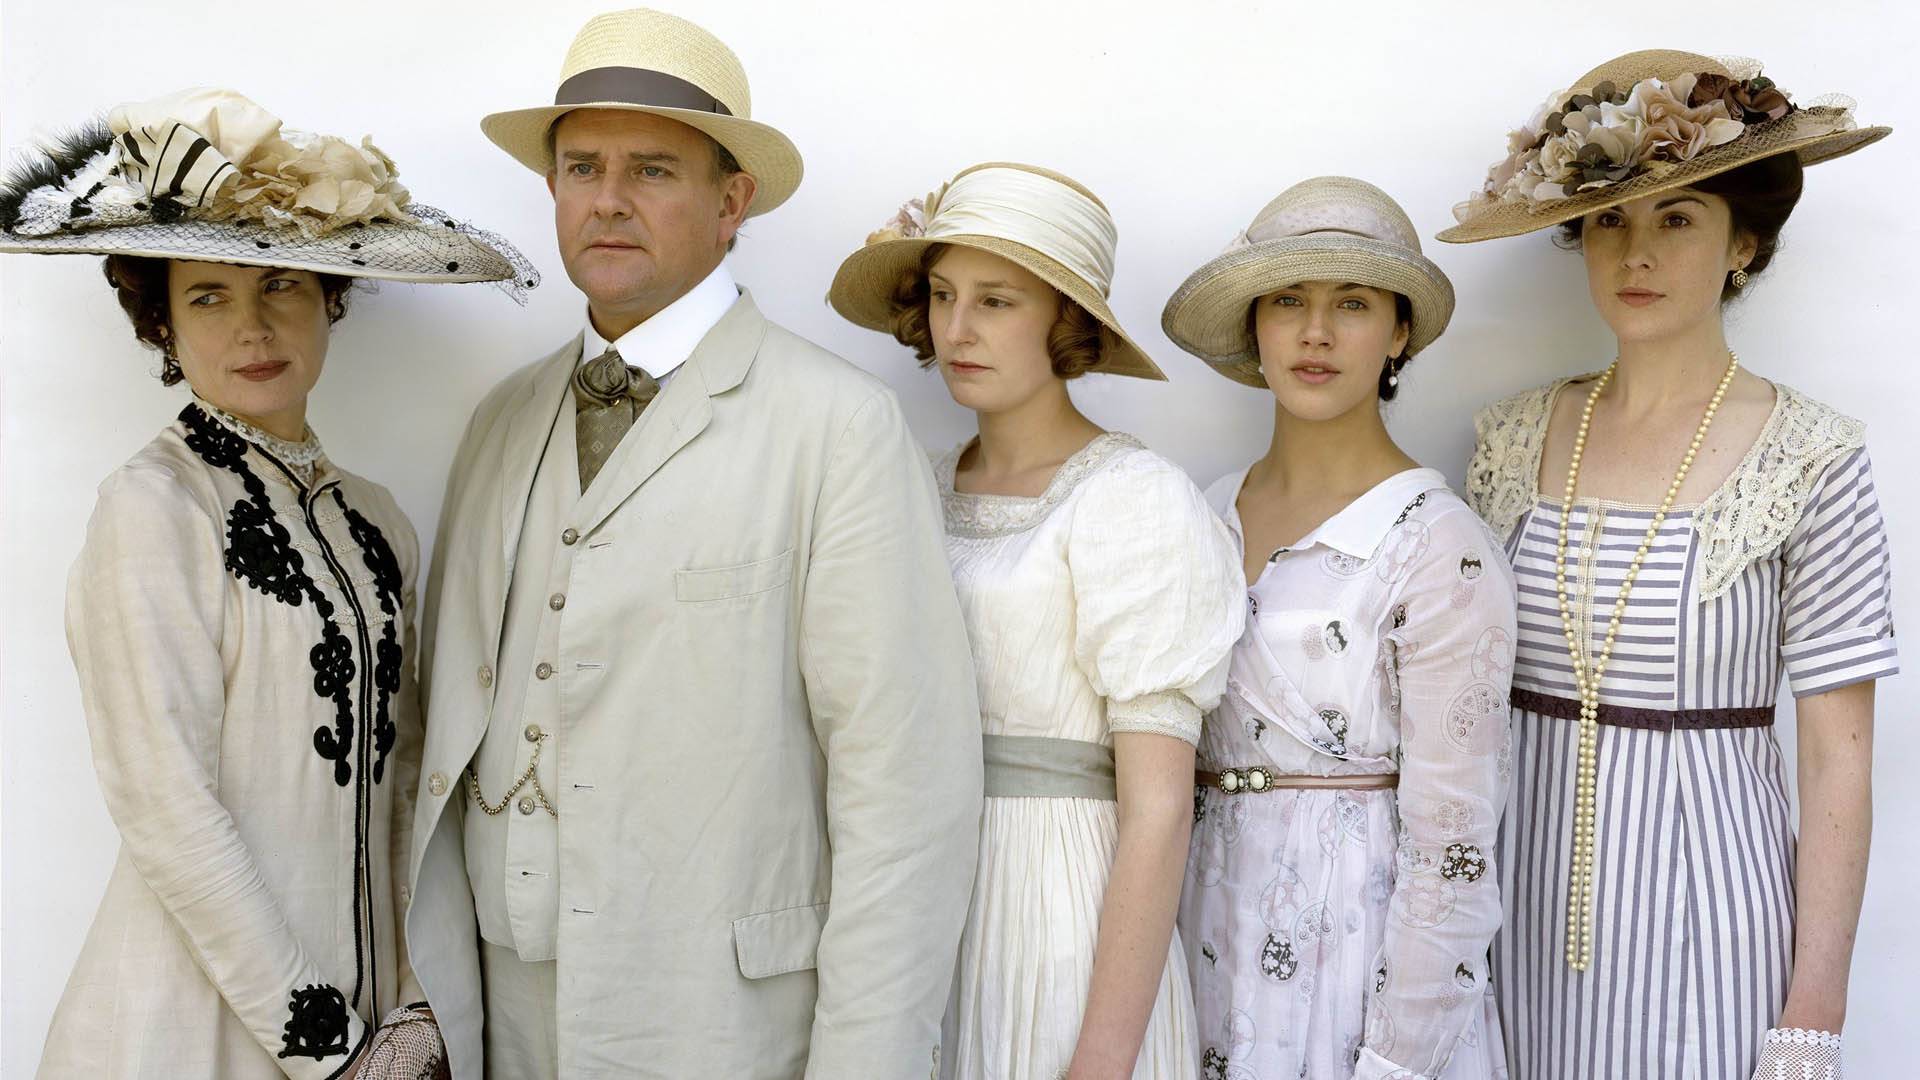 Downton Abbey - Wallpaper, High Definition, High Quality, Widescreen